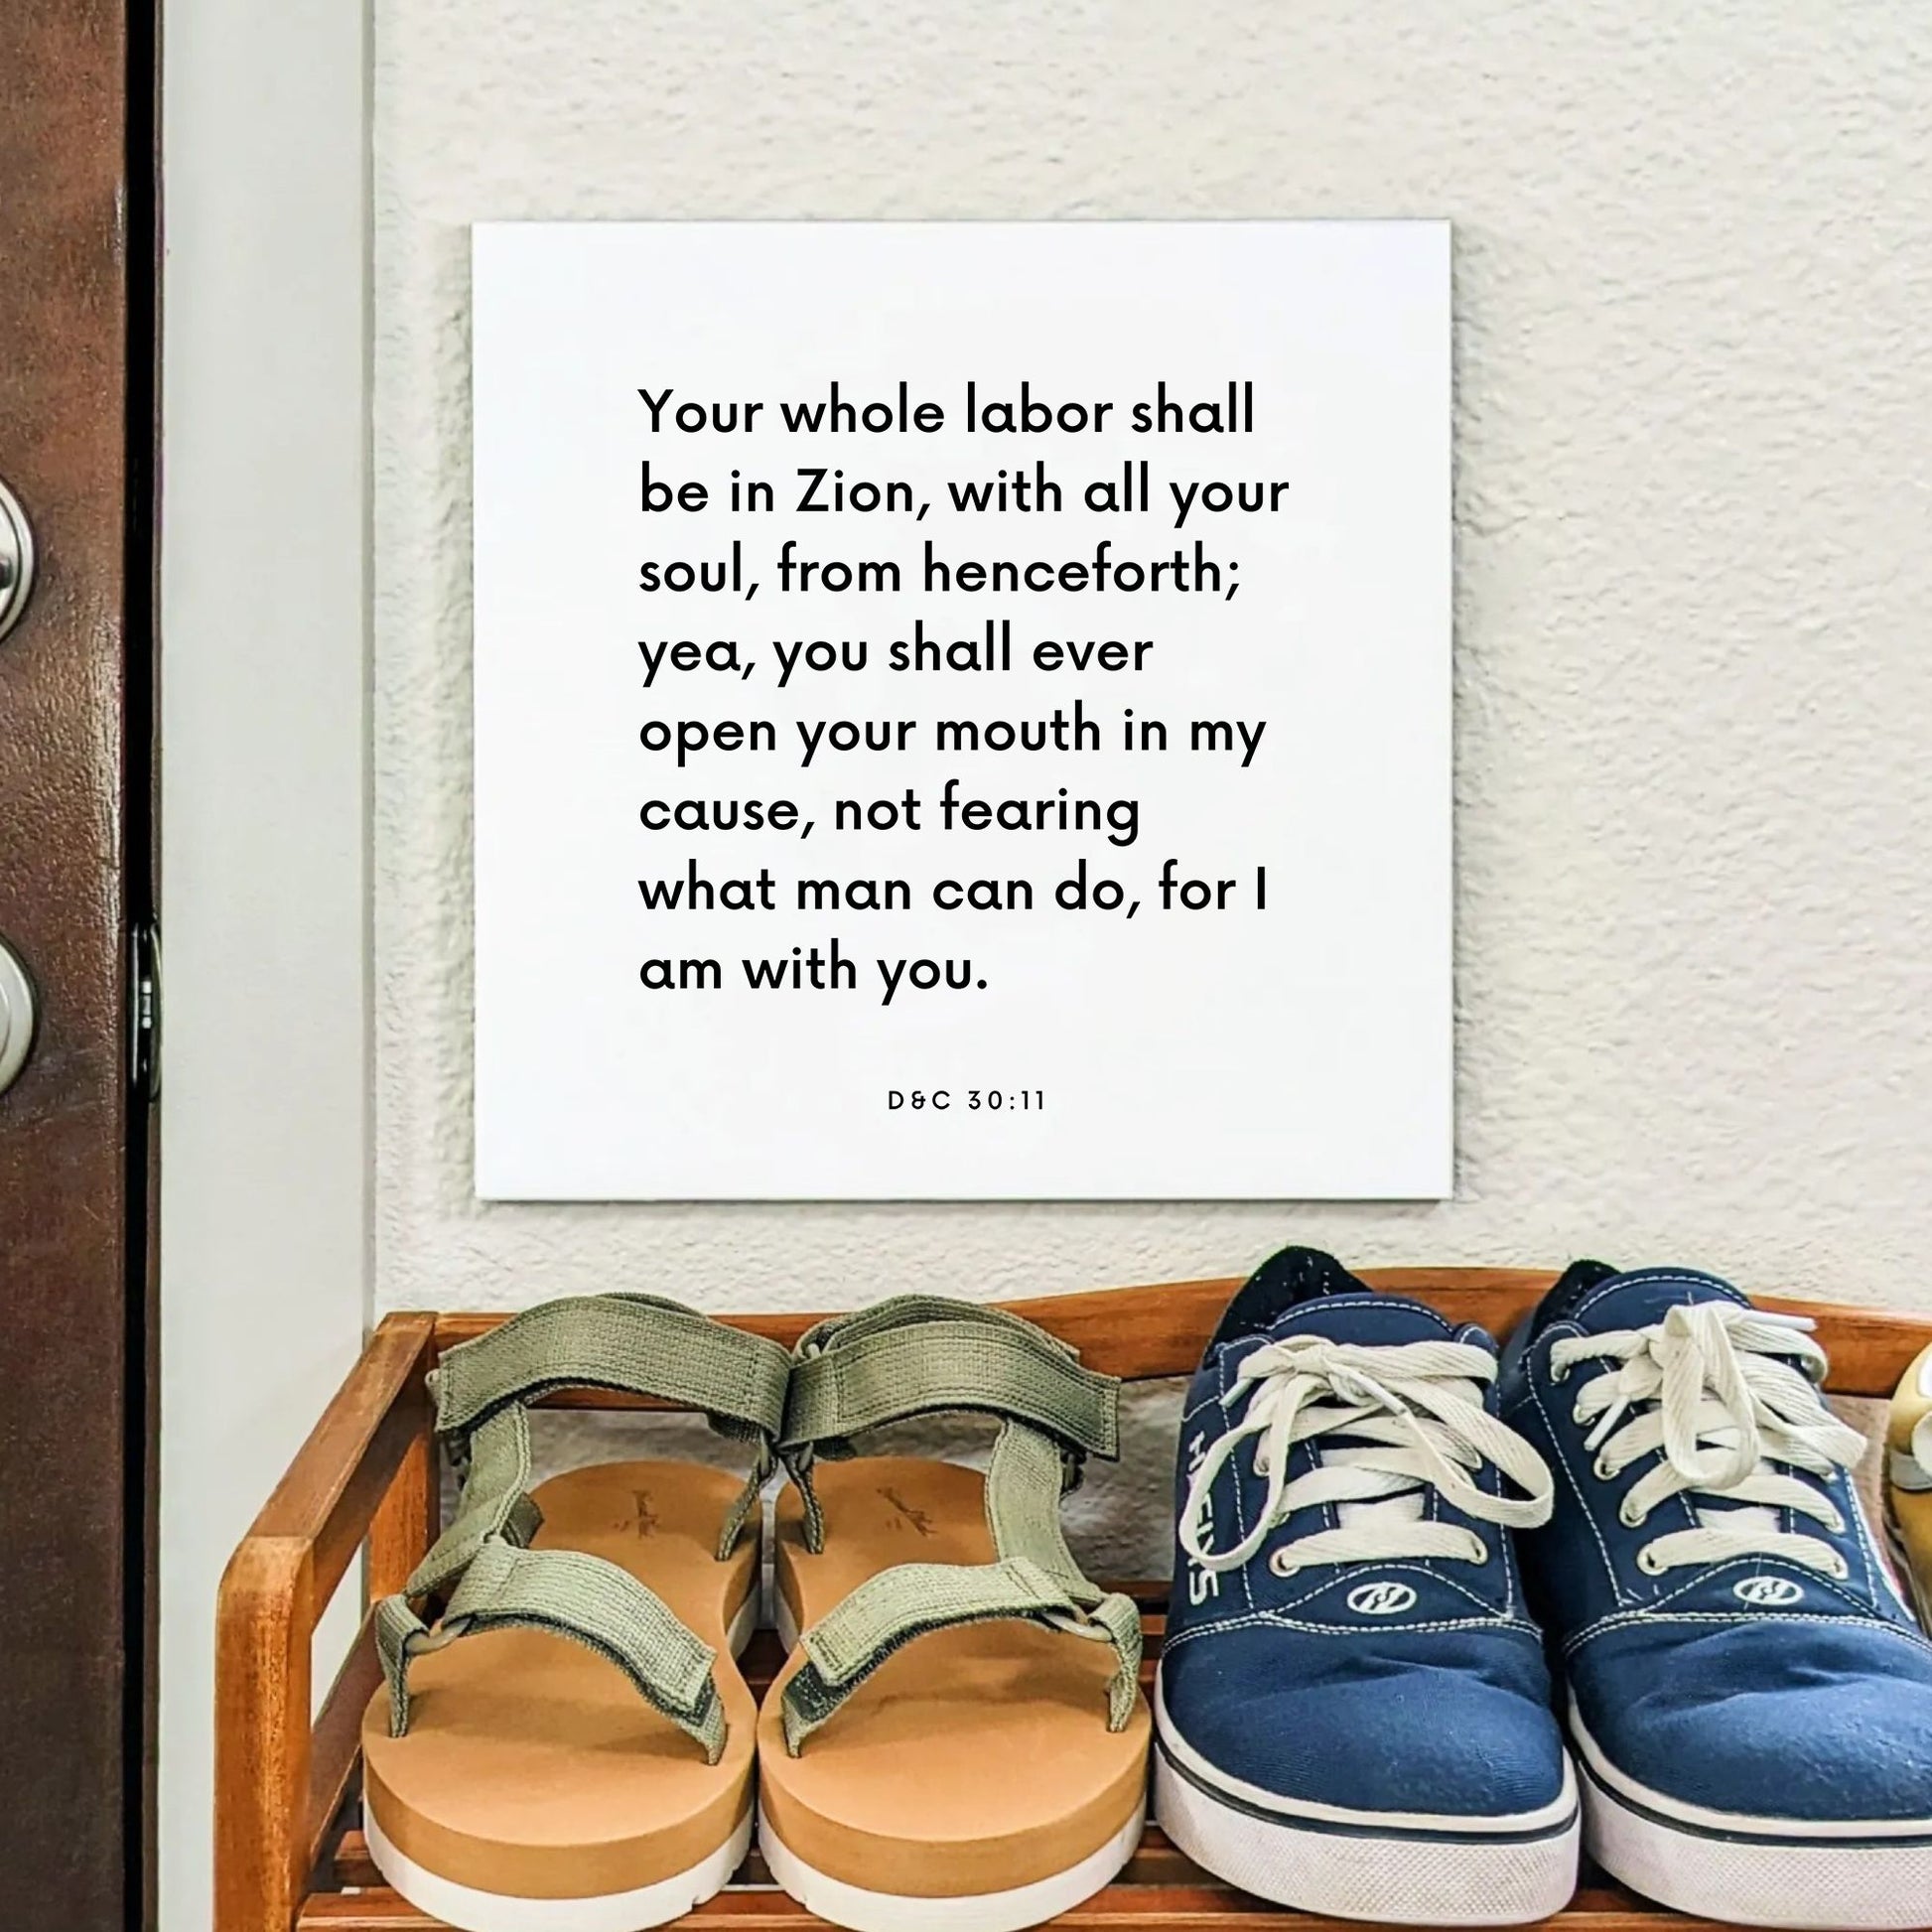 Shoes mouting of the scripture tile for D&C 30:11 - "Your whole labor shall be in Zion, with all your soul"